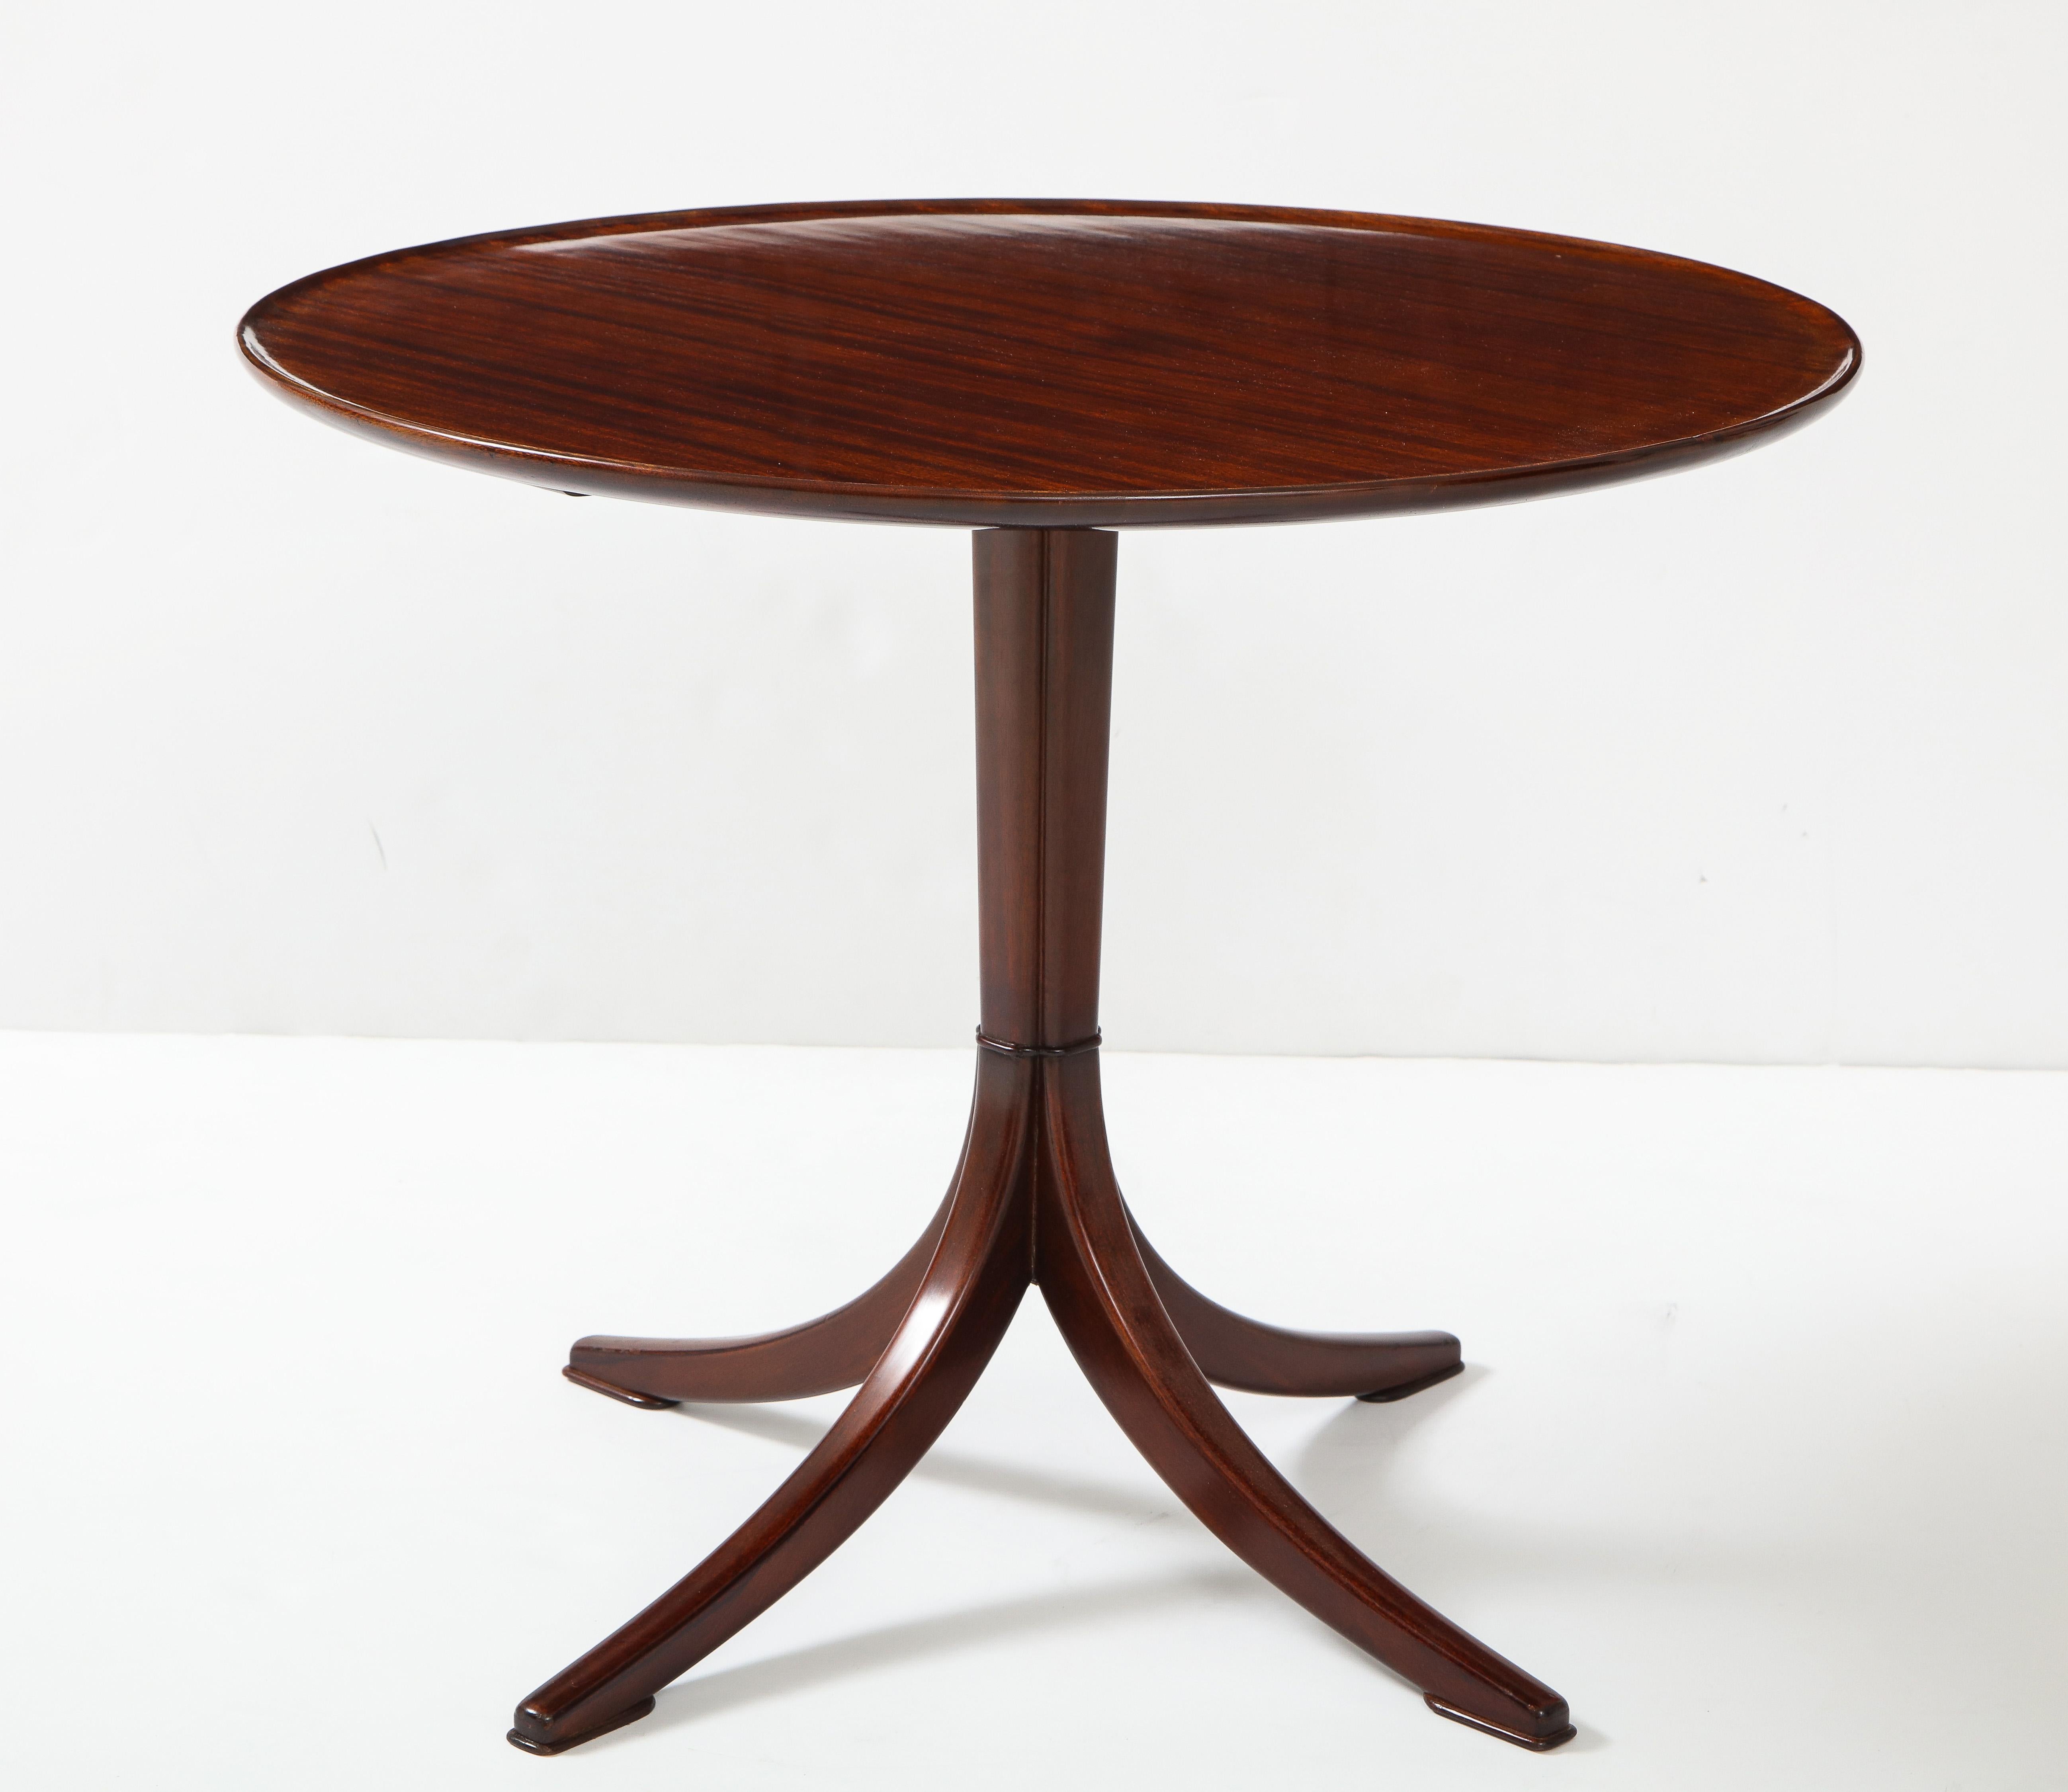 Scandinavian Modern Frits Henningsen rich mahogany side table, circa 1940s, with a circular edged top raised on a clustered stem with four downswept legs.
  